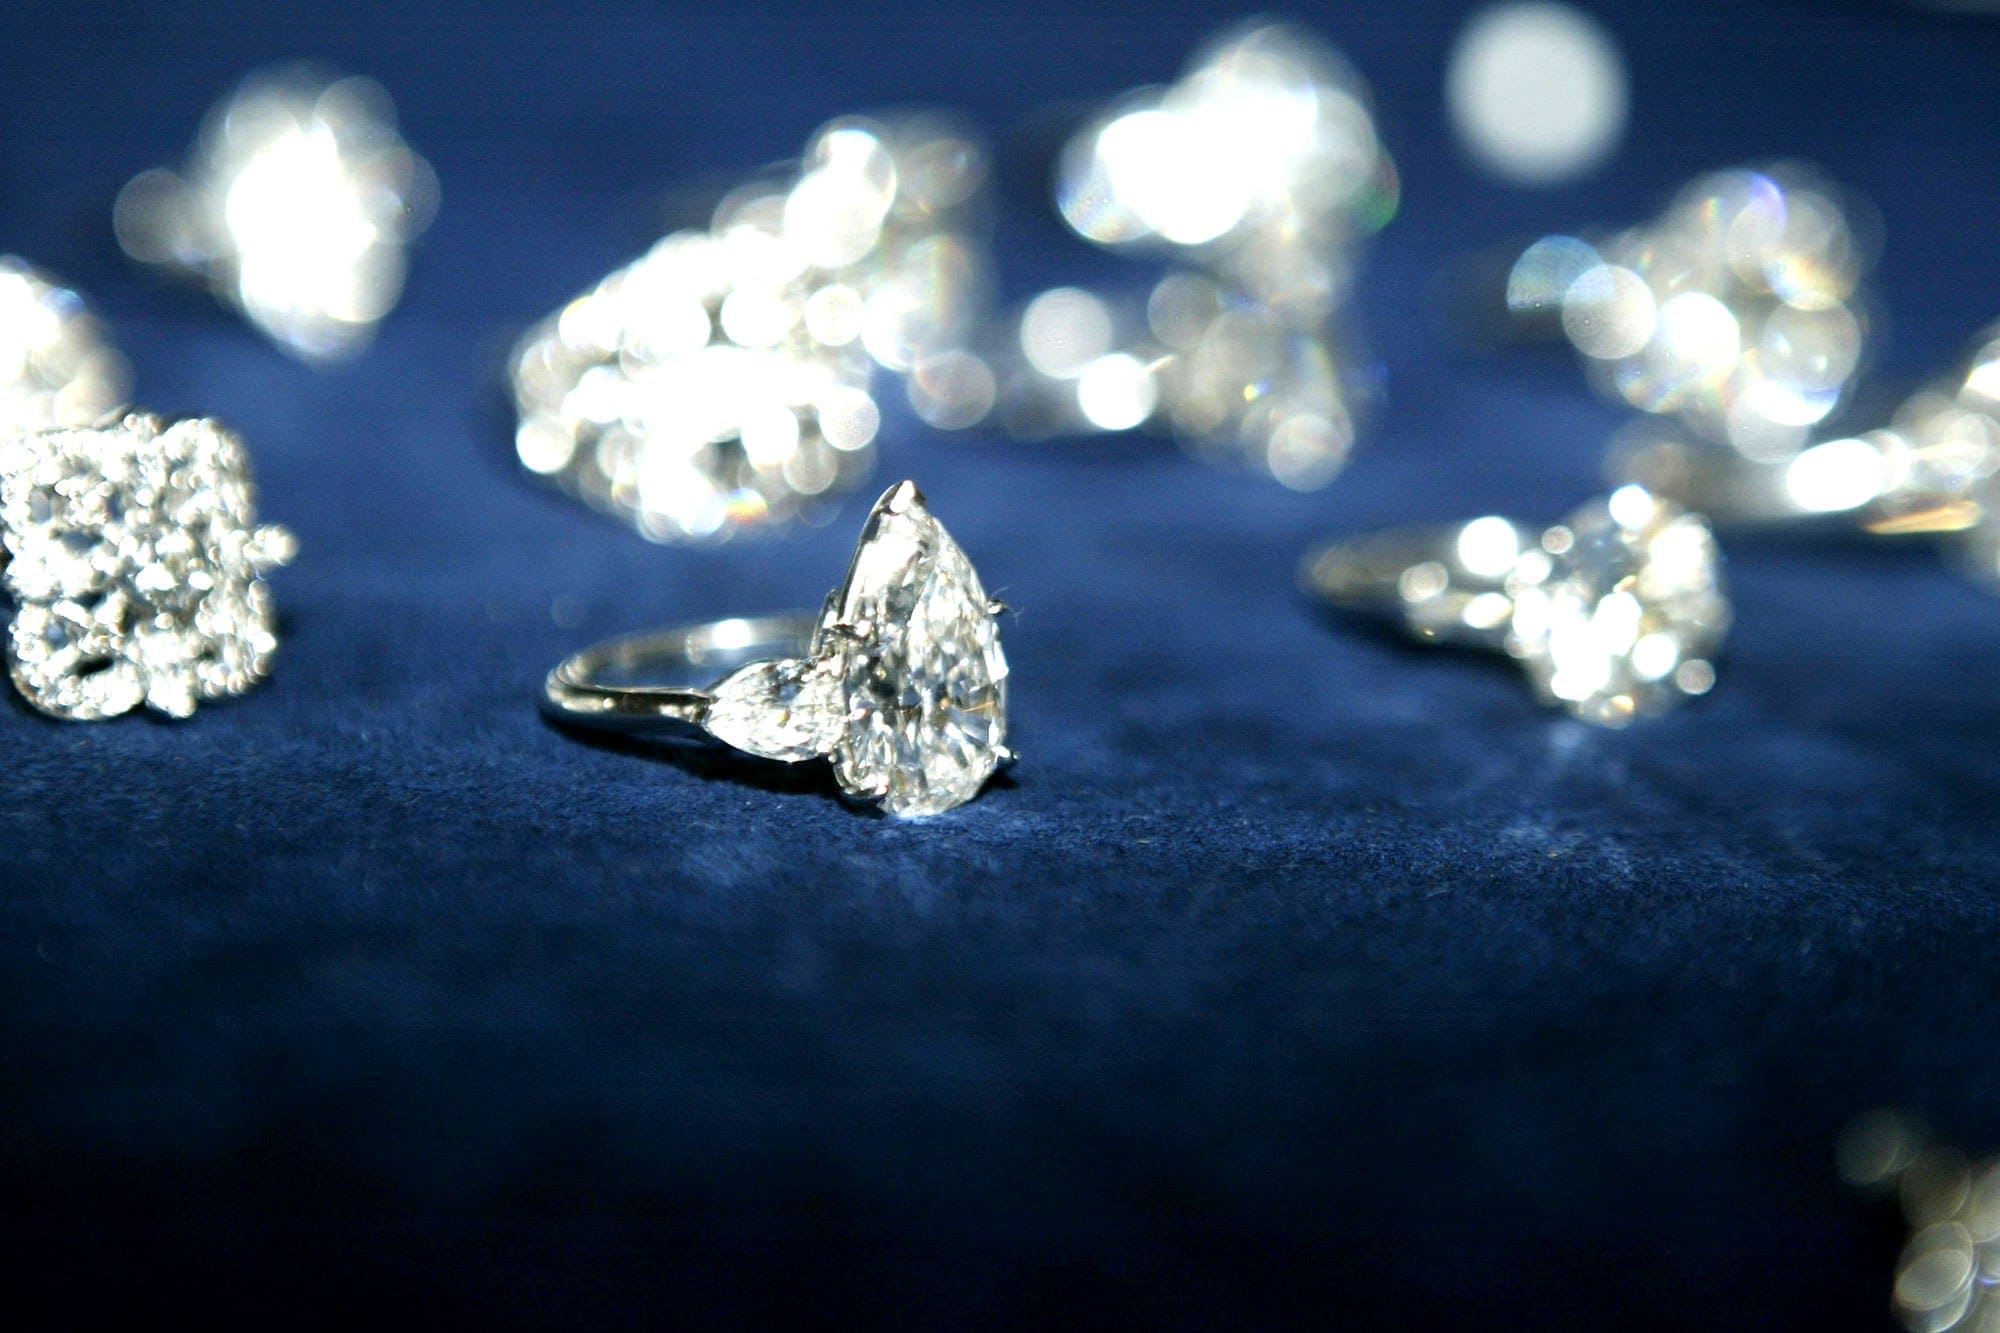 Singapore-based Luxiee is the world’s first online diamond market